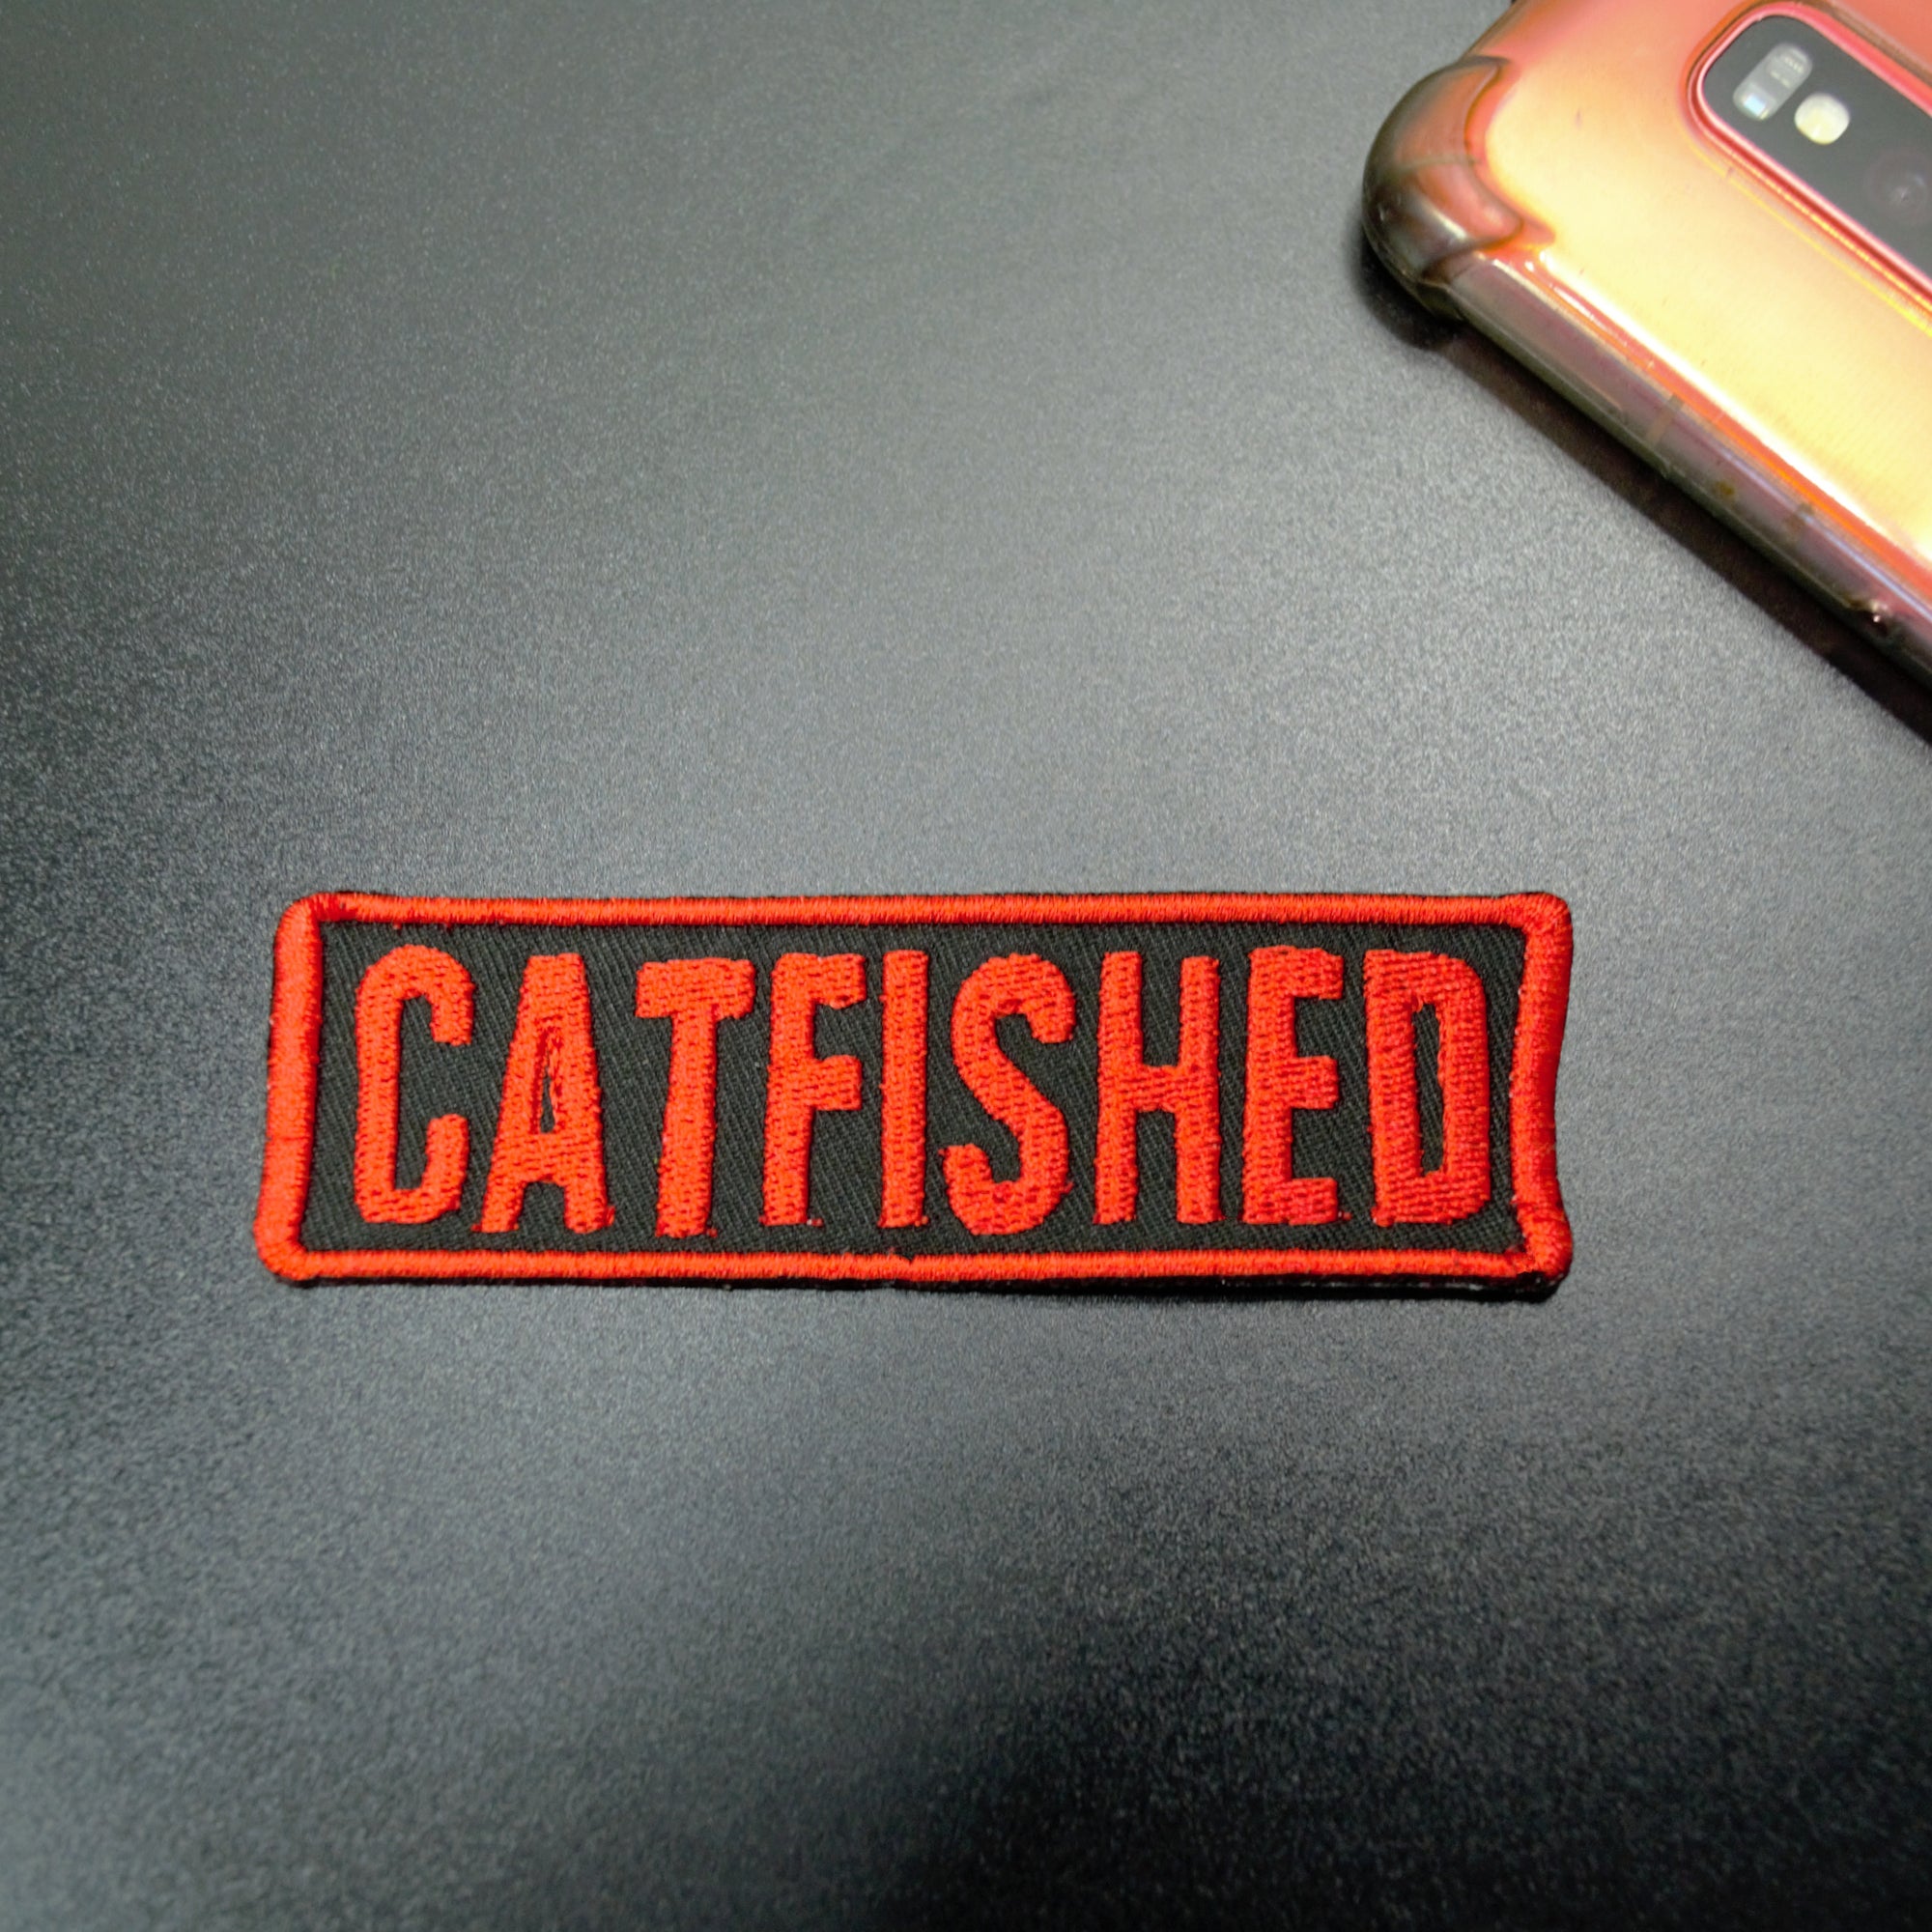 catfished show patch